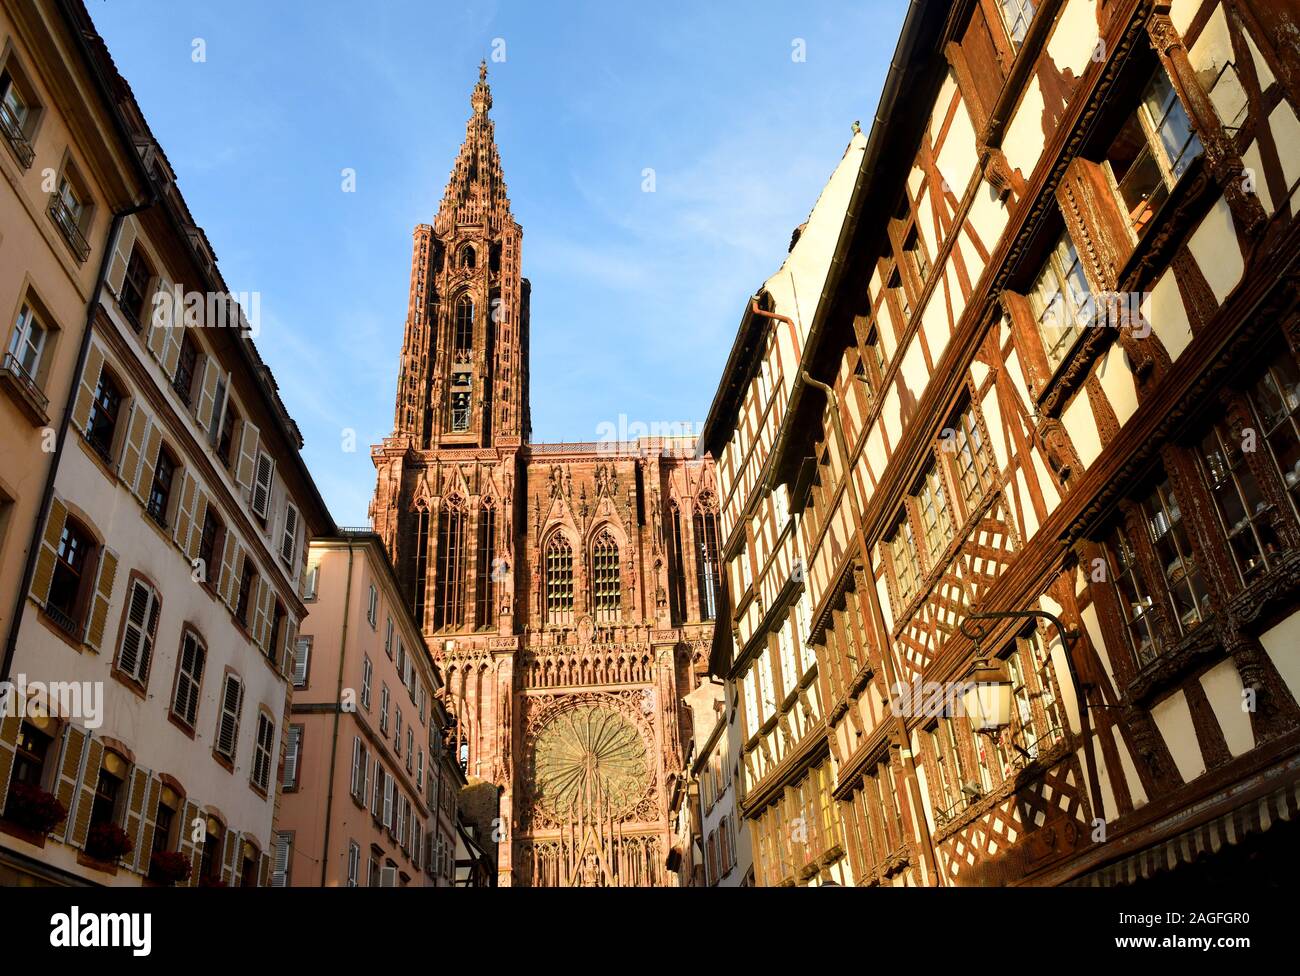 Strasbourg Cathedral or the Cathedral of Our Lady of Strasbourg (Cathedrale Notre-Dame de Strasbourg) in Strasbourg, France. Stock Photo